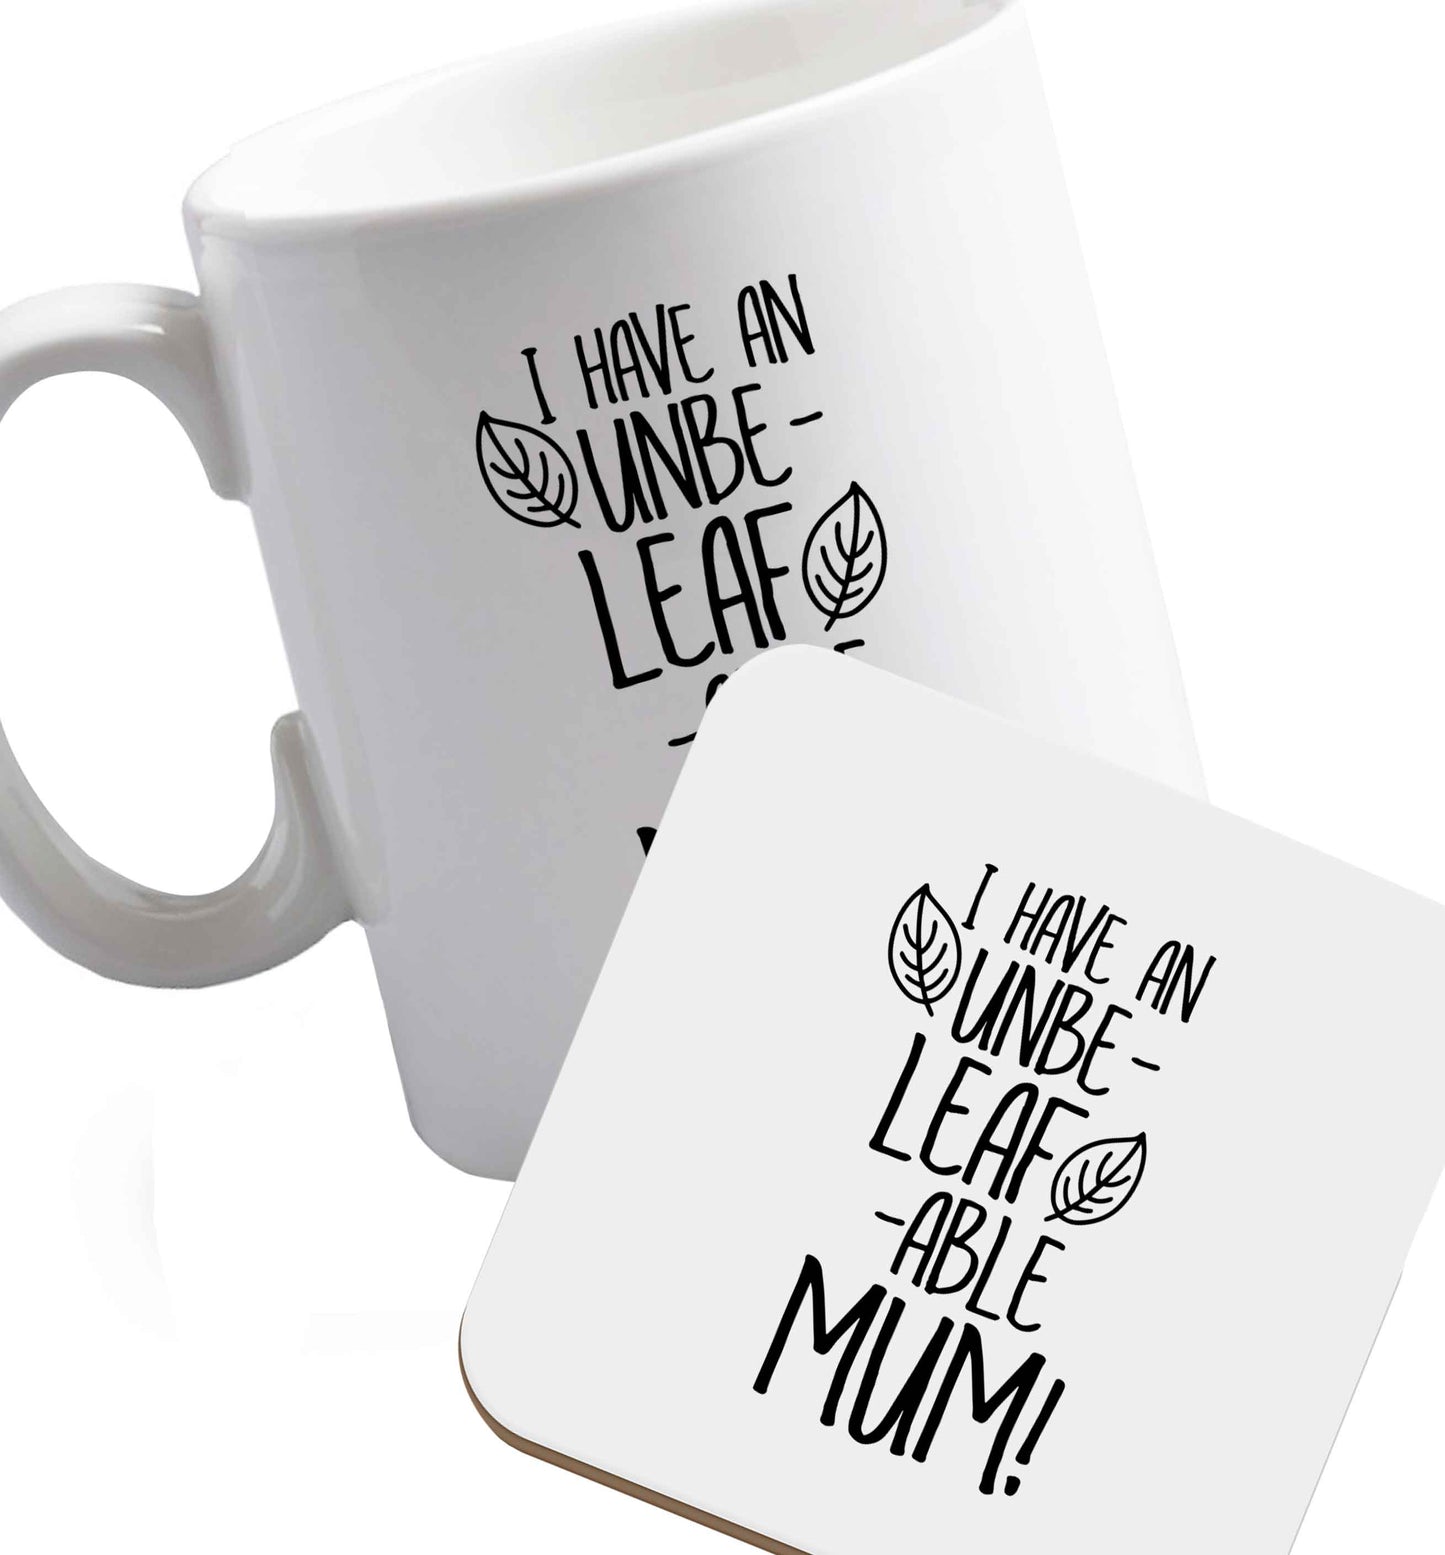 10 oz I have an unbeleafable mum! ceramic mug and coaster set right handed